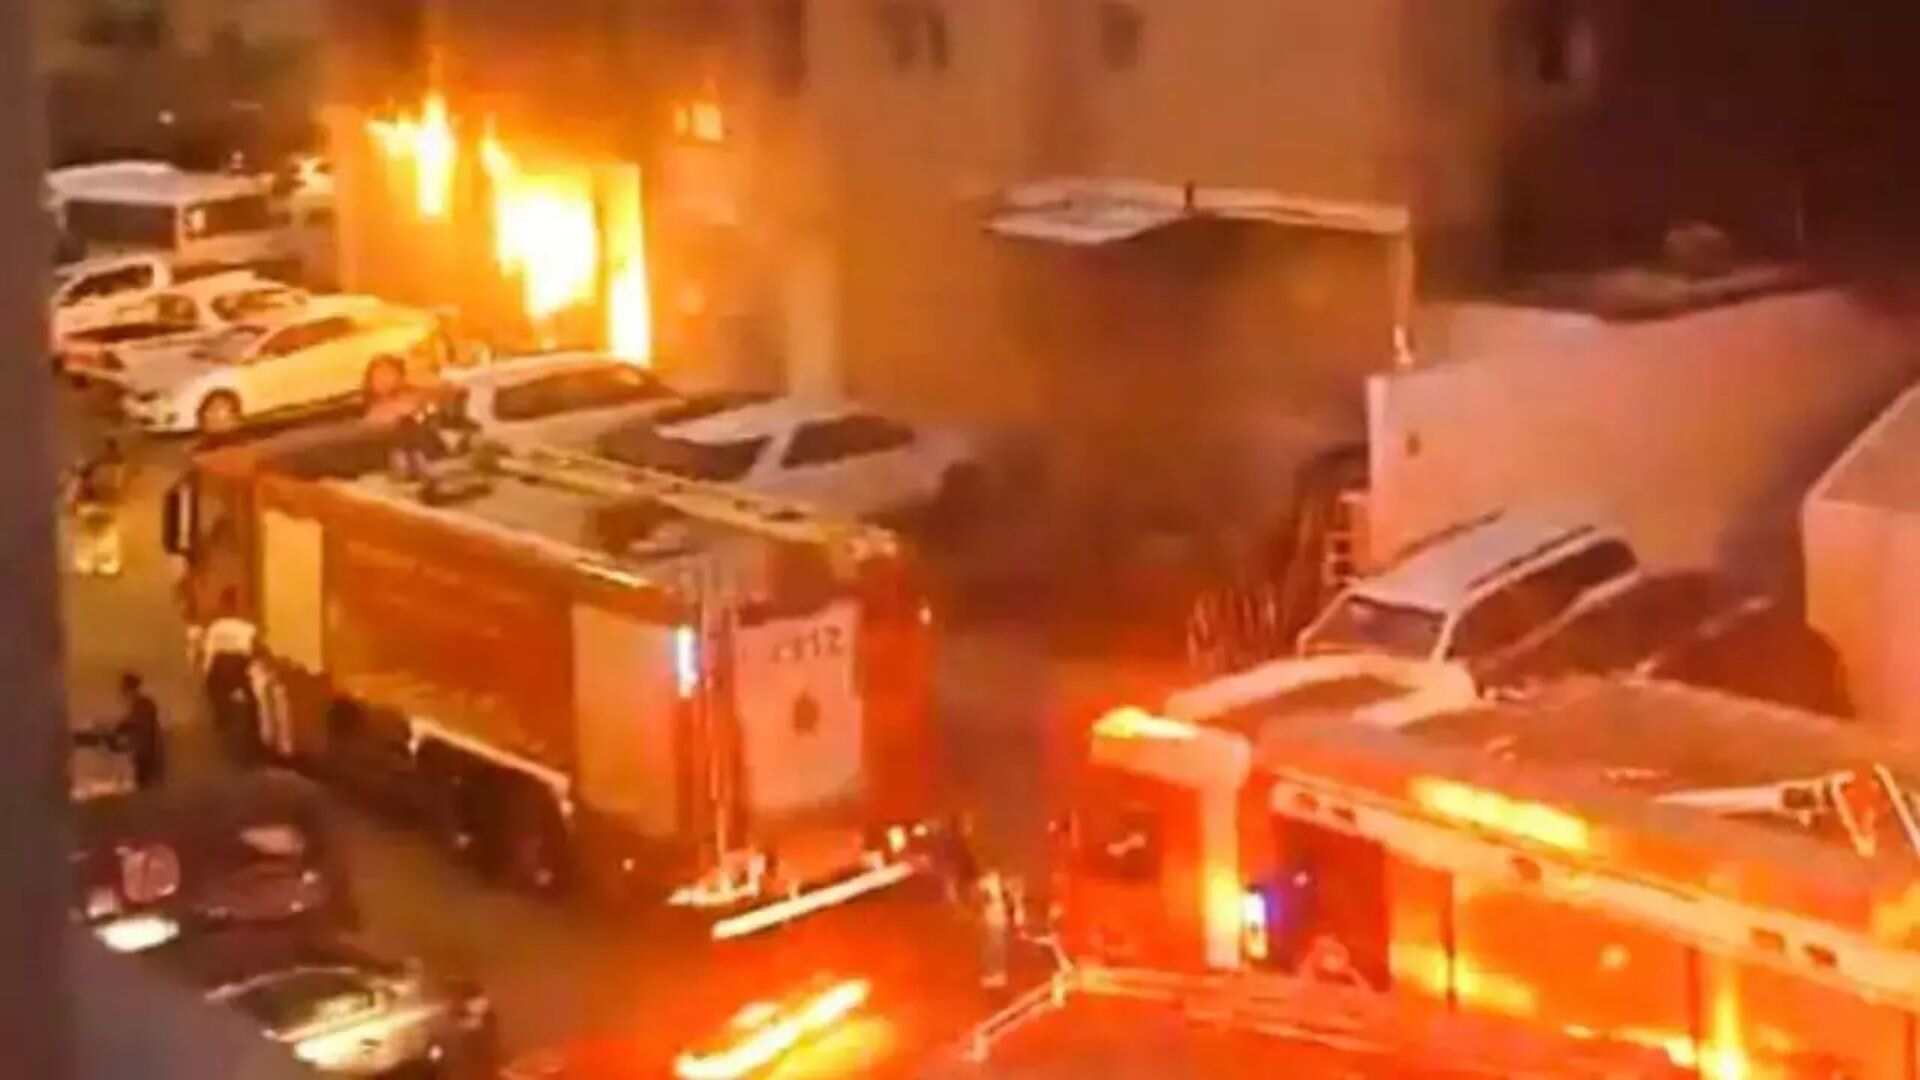 Kuwait Fire Incident: Most Victims Passed Away In Their Sleep After Inhaling Smoke